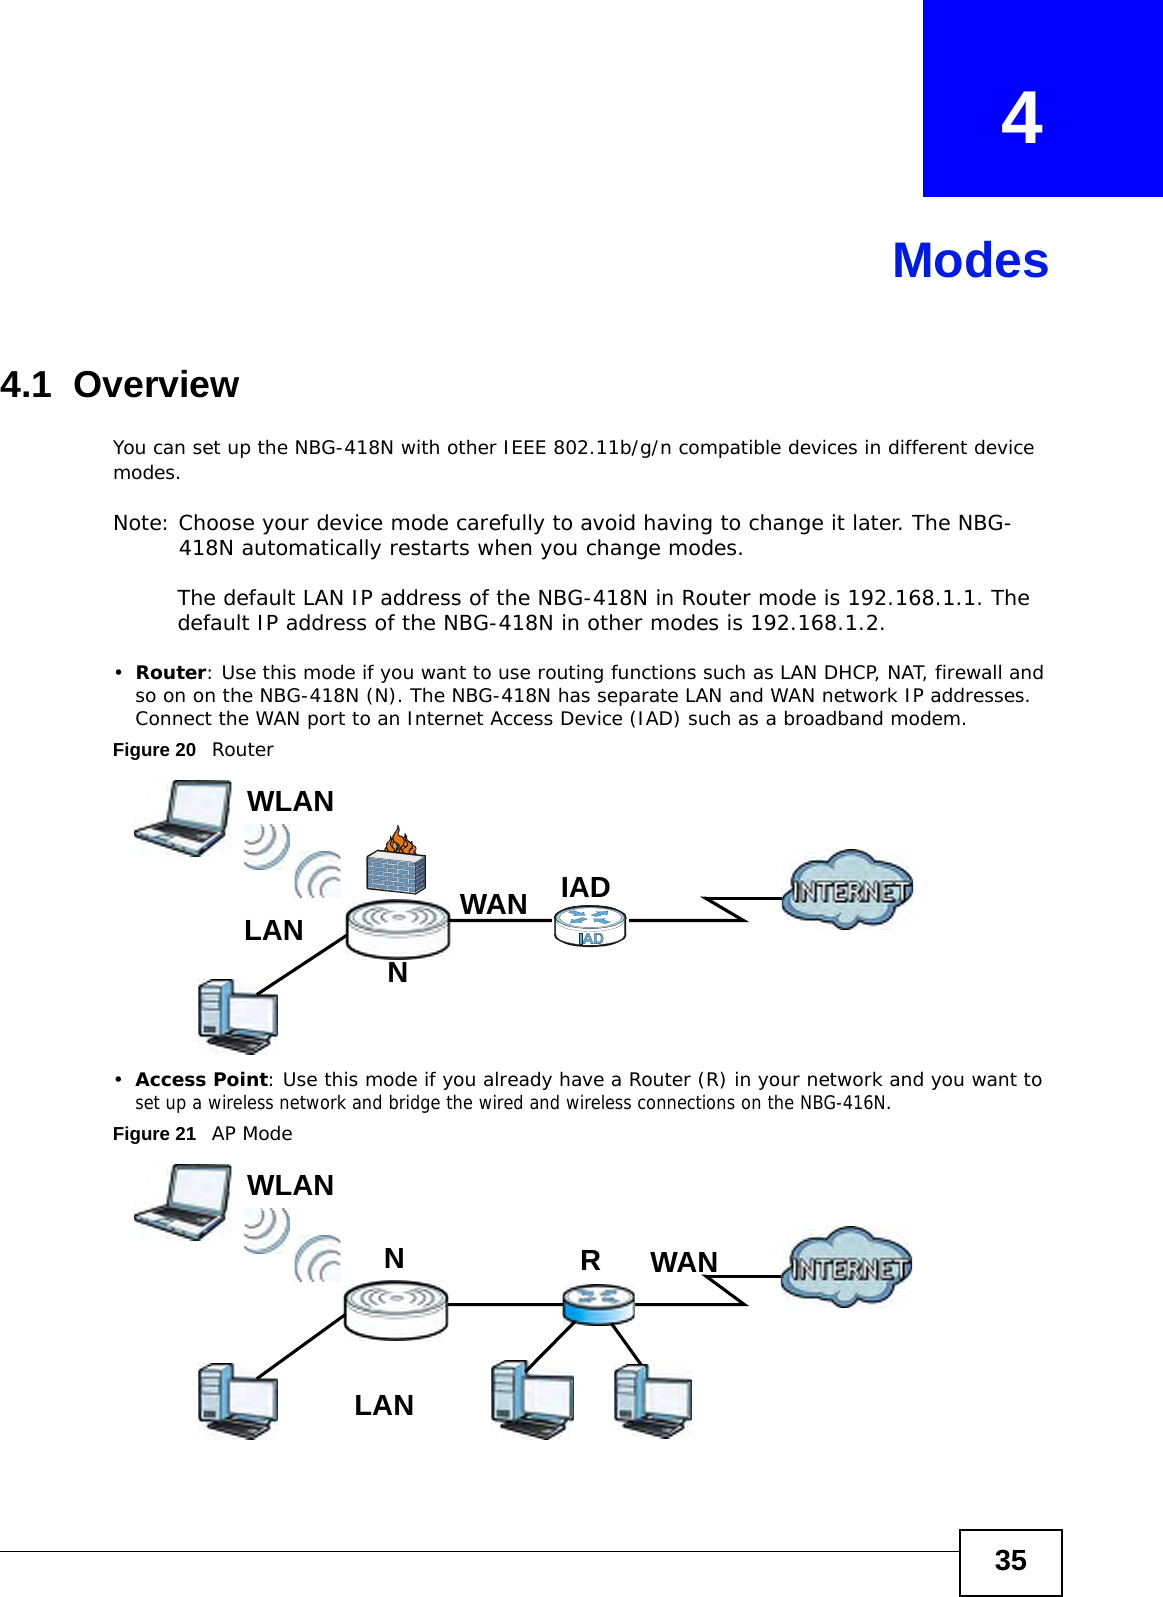 35CHAPTER   4 Modes4.1  OverviewYou can set up the NBG-418N with other IEEE 802.11b/g/n compatible devices in different device modes.Note: Choose your device mode carefully to avoid having to change it later. The NBG-418N automatically restarts when you change modes.The default LAN IP address of the NBG-418N in Router mode is 192.168.1.1. The default IP address of the NBG-418N in other modes is 192.168.1.2.•Router: Use this mode if you want to use routing functions such as LAN DHCP, NAT, firewall and so on on the NBG-418N (N). The NBG-418N has separate LAN and WAN network IP addresses. Connect the WAN port to an Internet Access Device (IAD) such as a broadband modem.Figure 20   Router•Access Point: Use this mode if you already have a Router (R) in your network and you want to set up a wireless network and bridge the wired and wireless connections on the NBG-416N.Figure 21   AP Mode LEWWLANLAN WANNIADLEWWLANLANWANNR